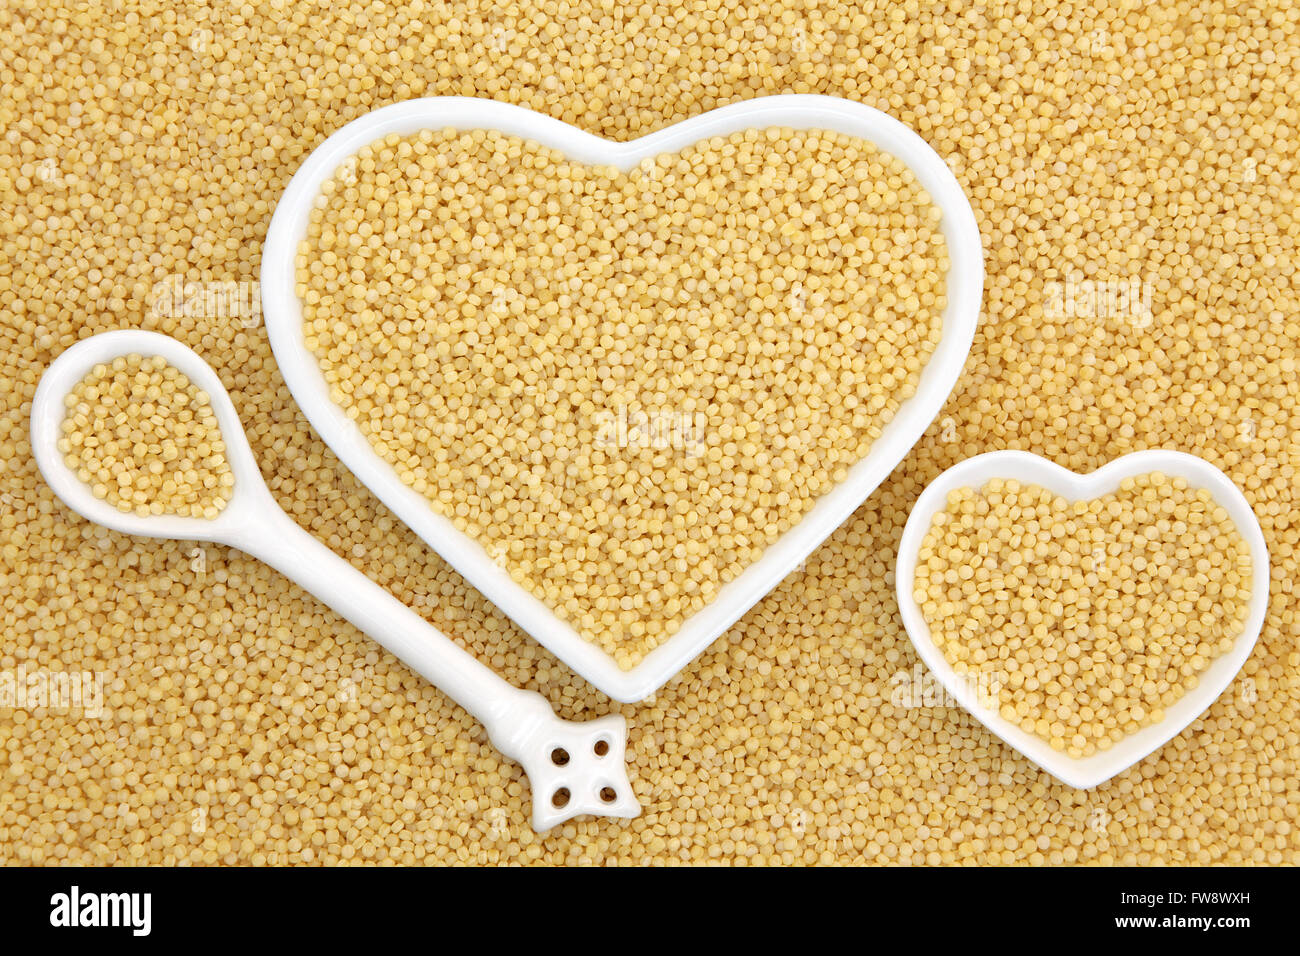 Pearl couscous food in heart shaped bowls and porcelain spoon forming an abstract background. Stock Photo